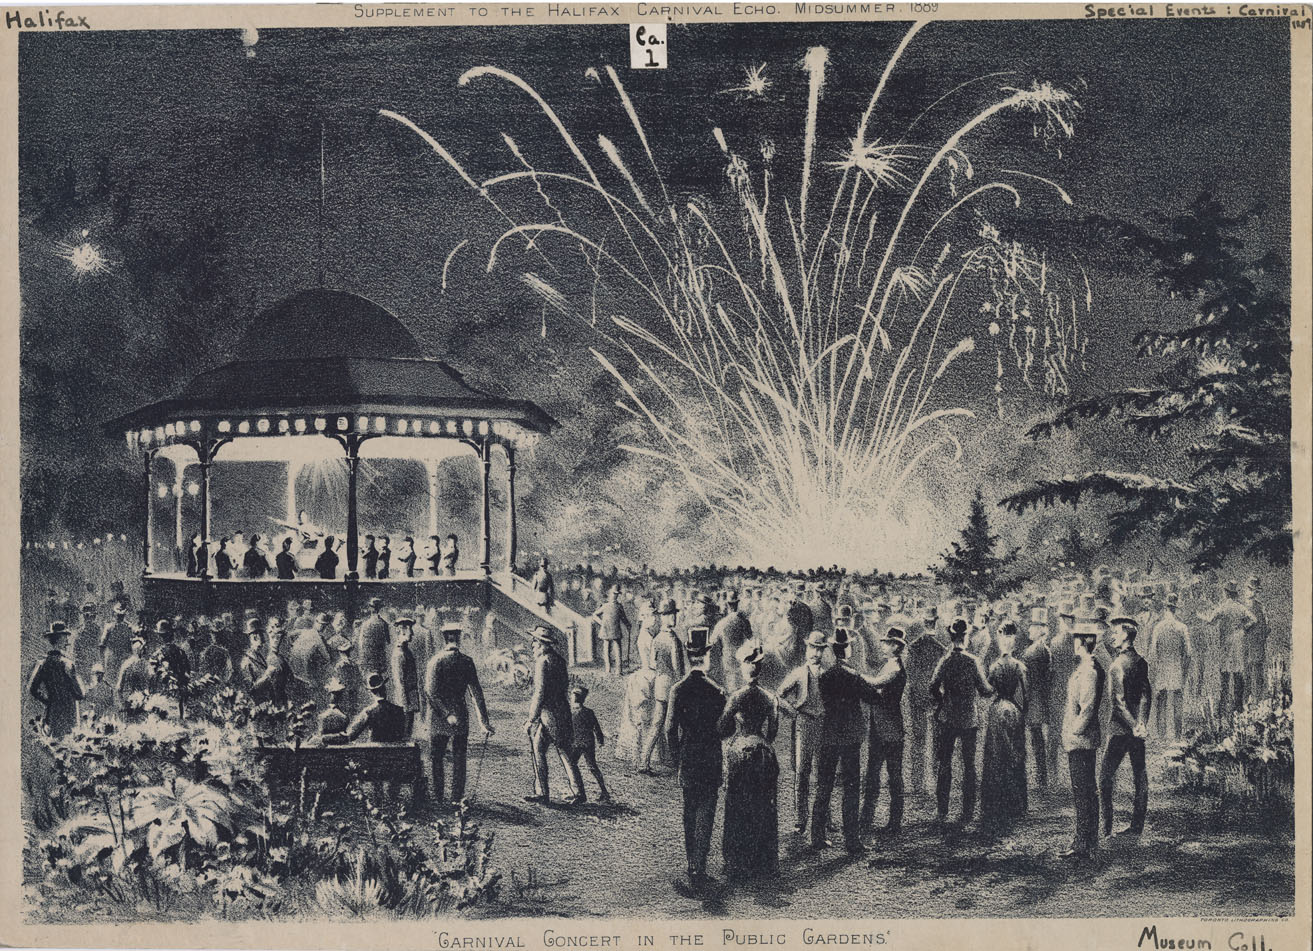 photocollection : Clippings: Special Events: Carnival Concert in the Public Gardens, 1889